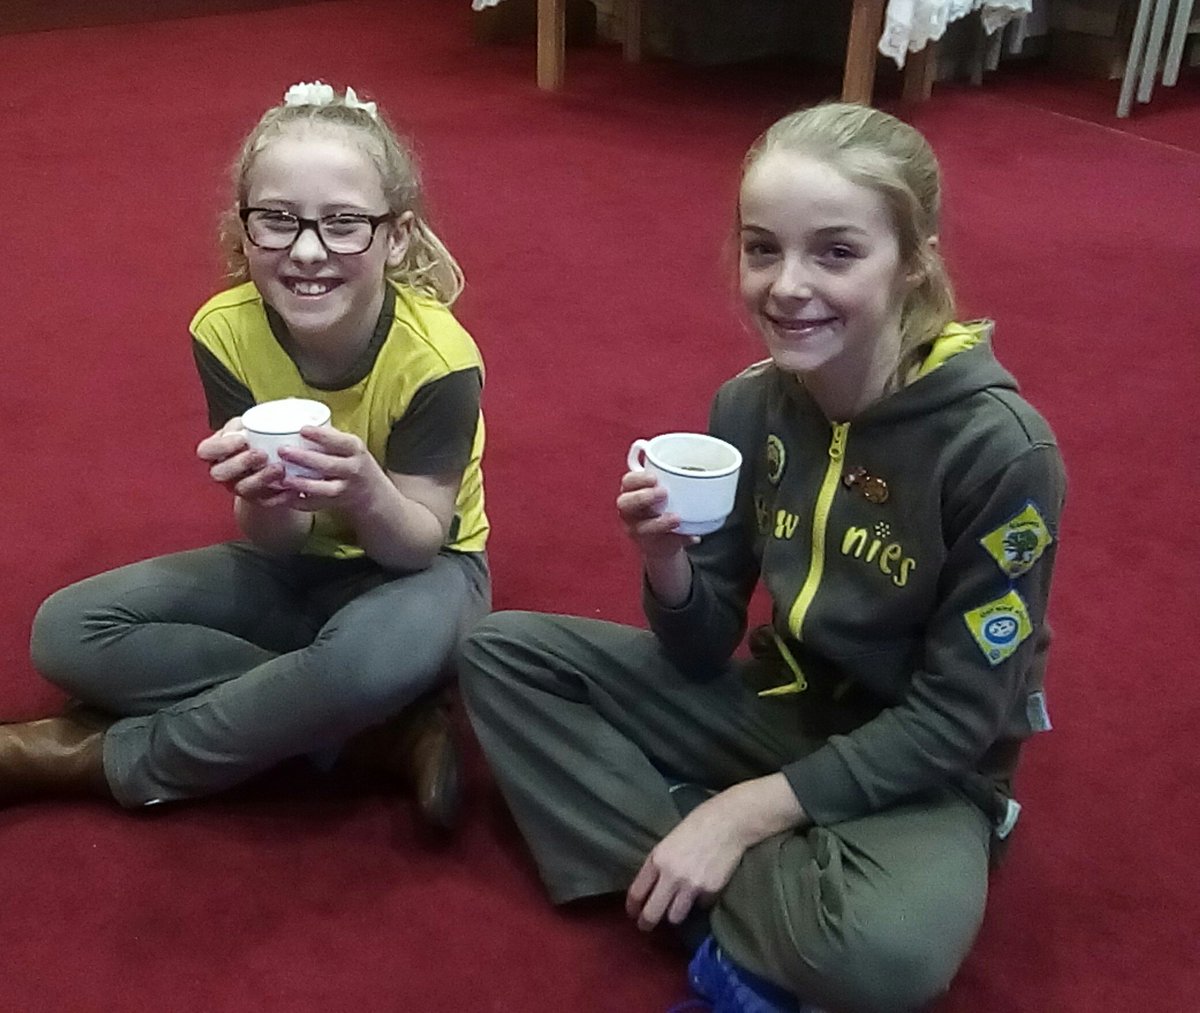 The owls and some Brownies braved the snow last night, so we rewarded ourselves with hot chocolate,cream and marshmallows #chocolatetreat @GirlguidingBly